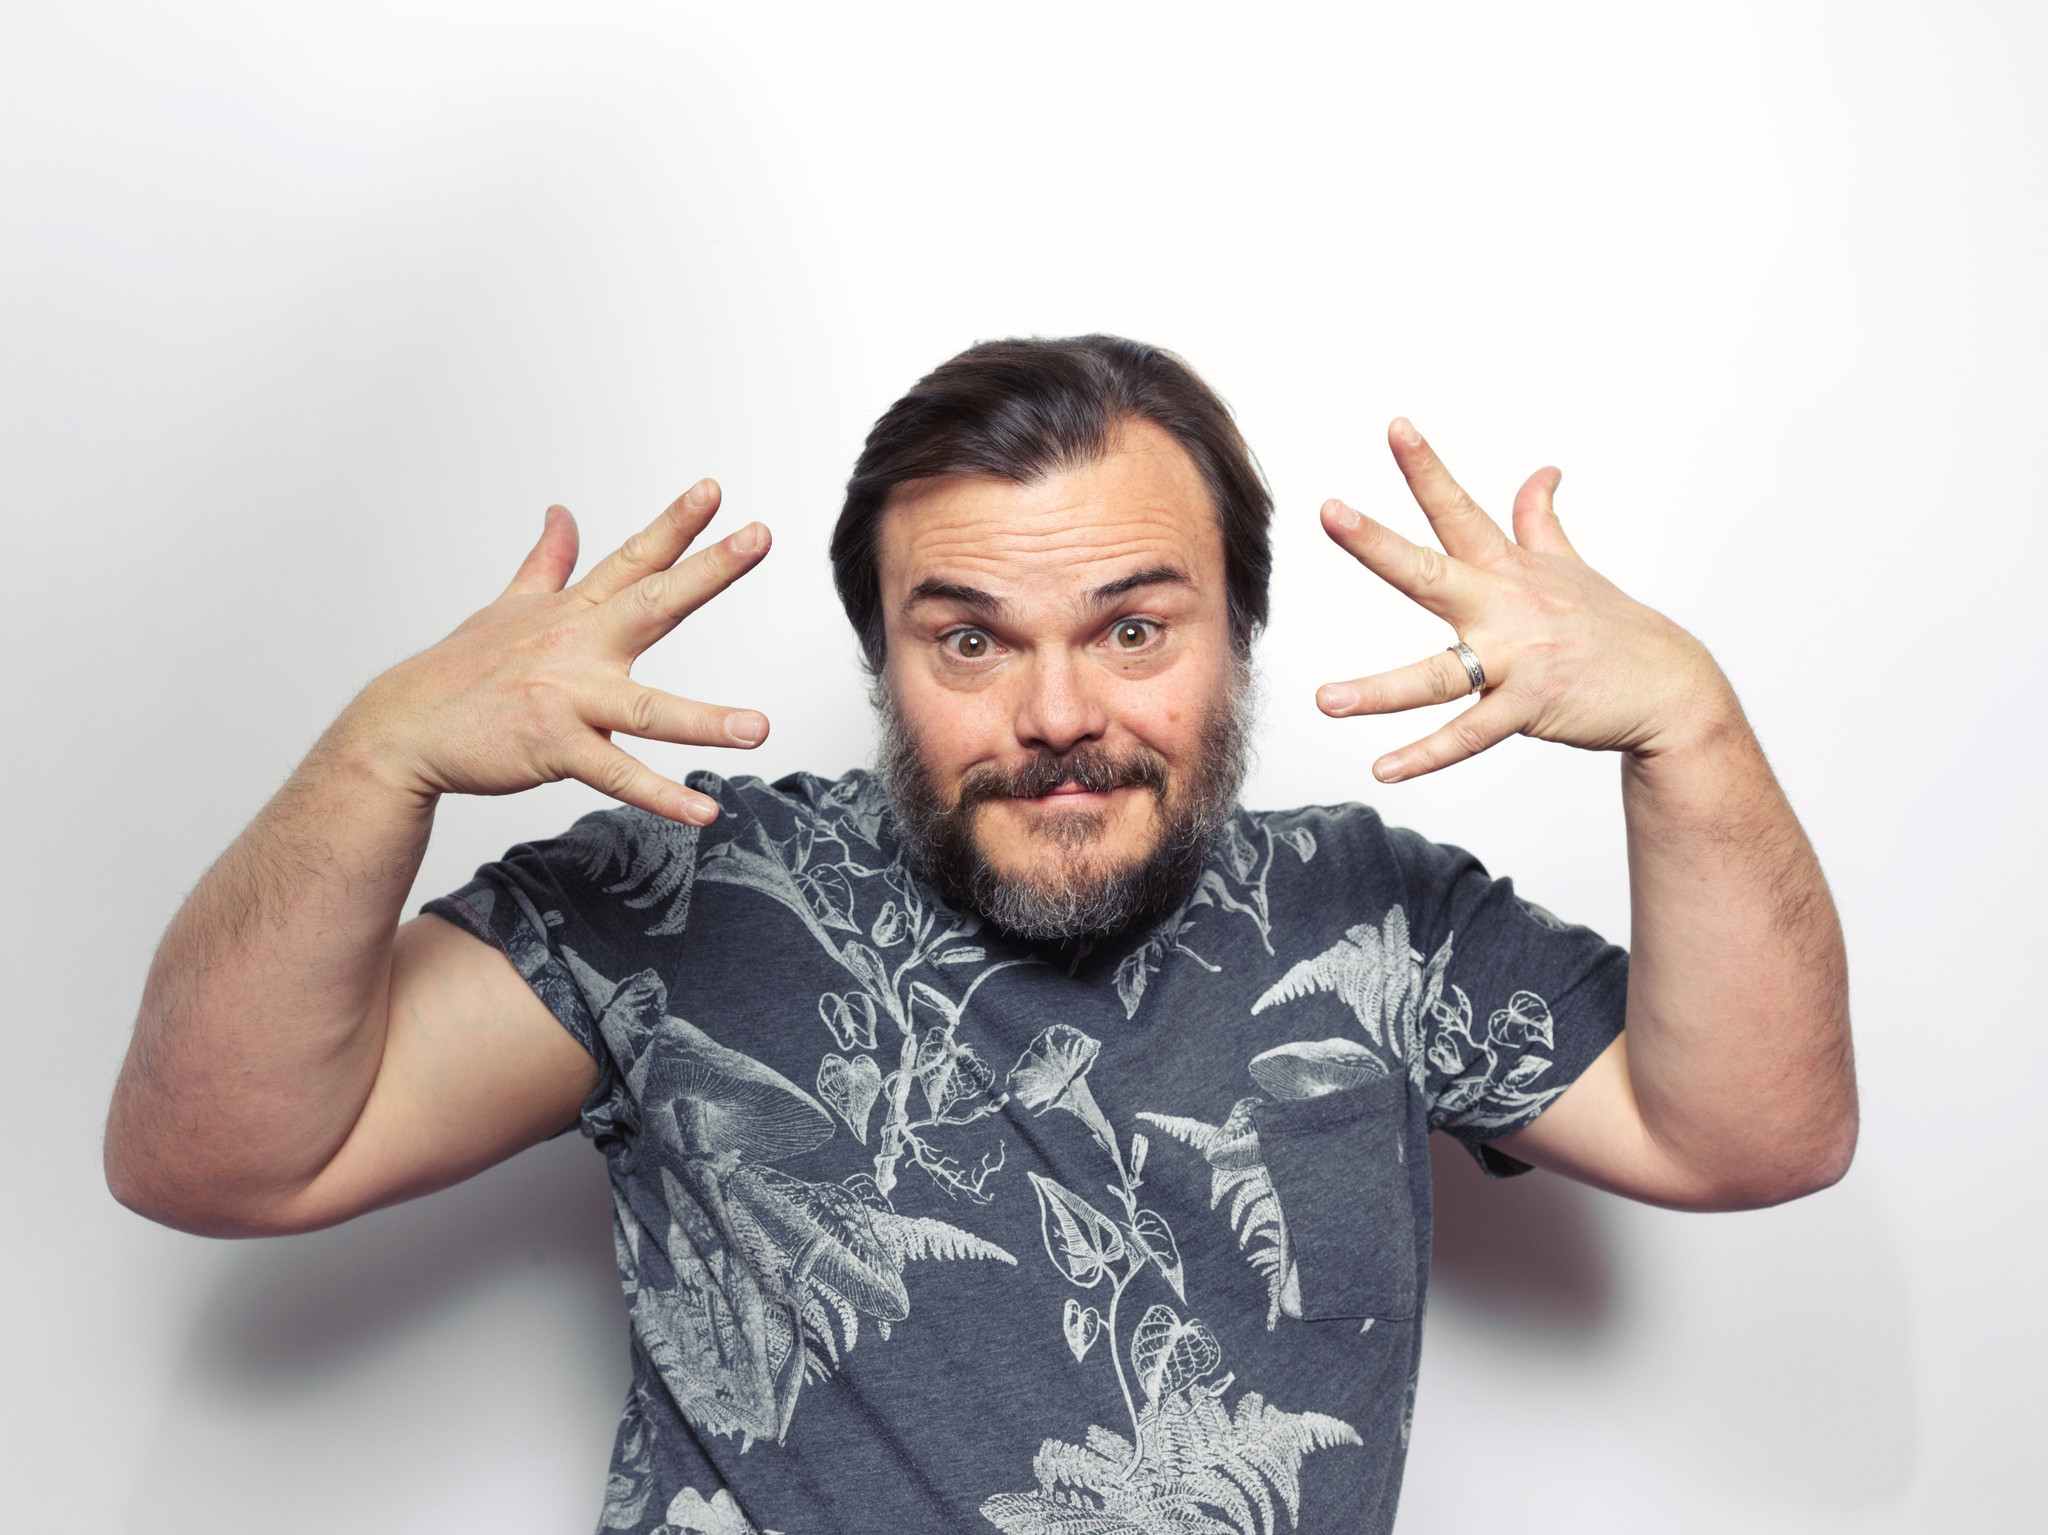 https://facts.net/wp-content/uploads/2023/07/40-facts-about-jack-black-1690549726.jpg